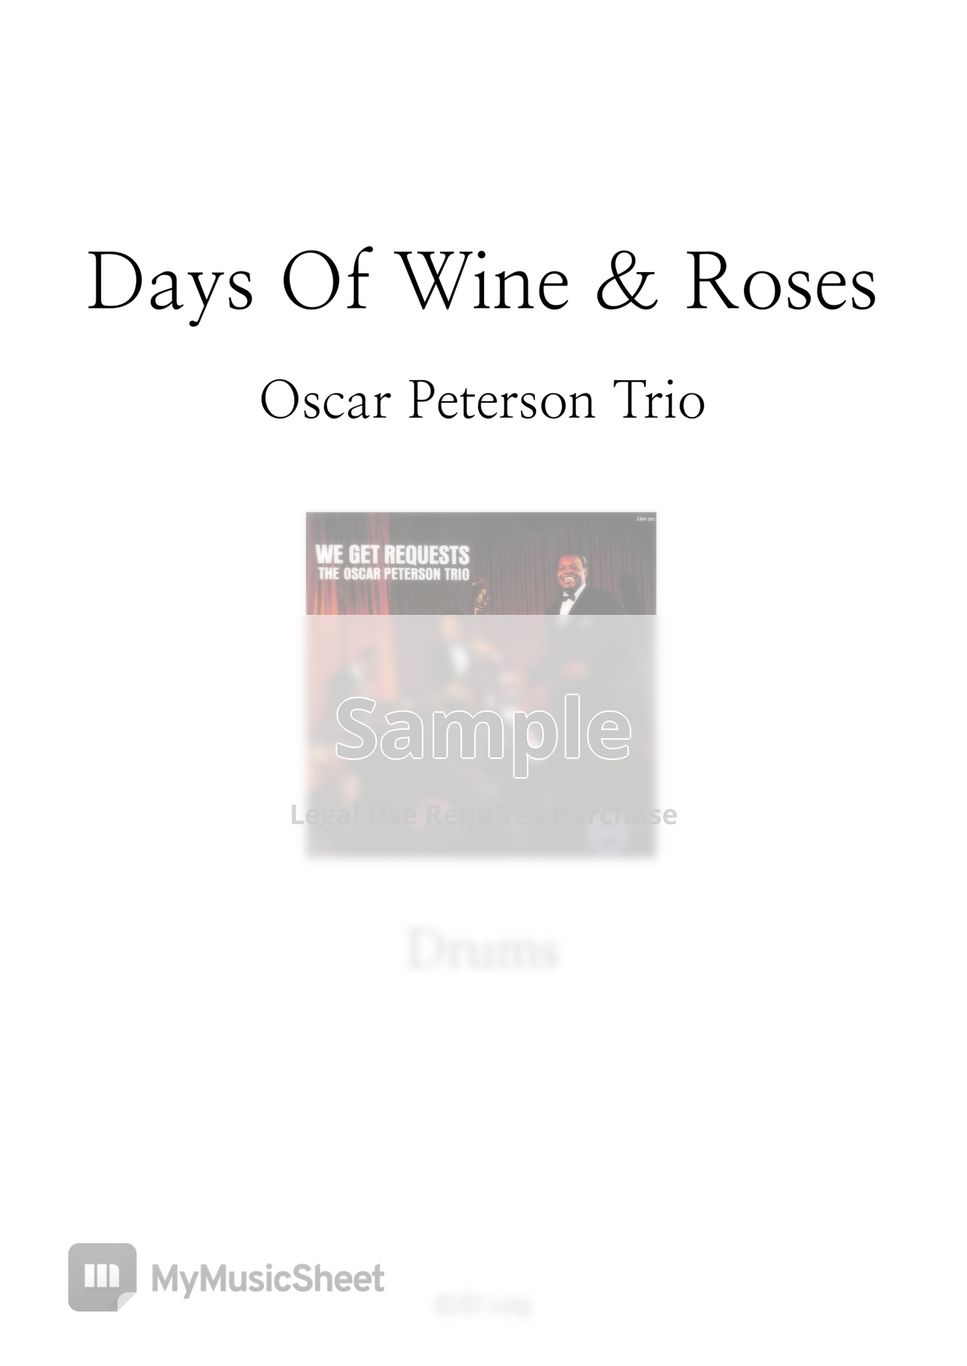 Oscar Peterson Trio - The Days Of Wine & Roses by DrumCore